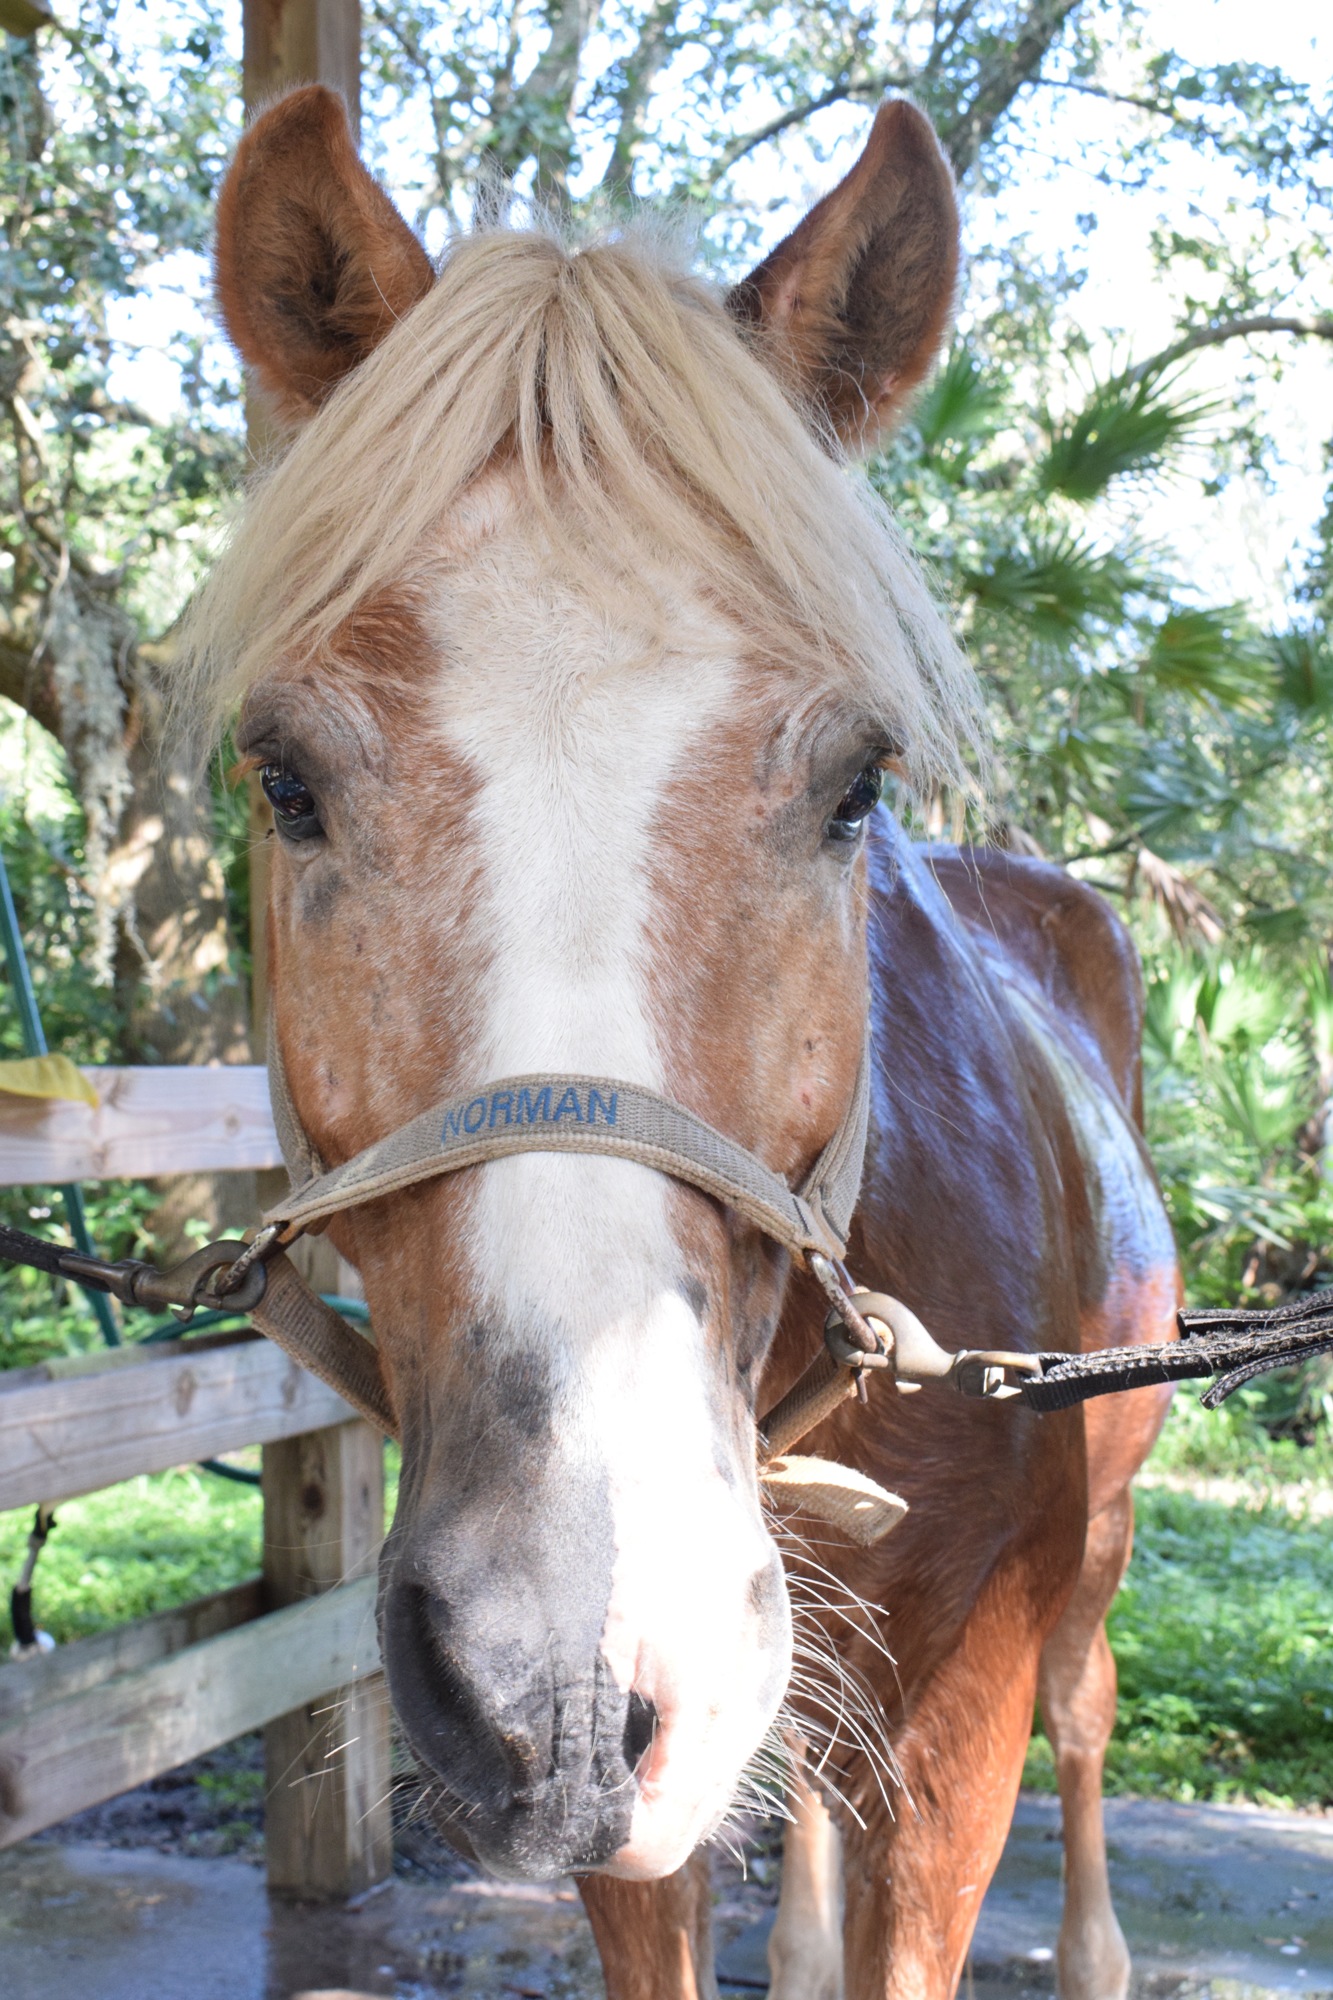 Norman is a 17-year-old haflinger horse. He is the barn greeter and loves to talk.